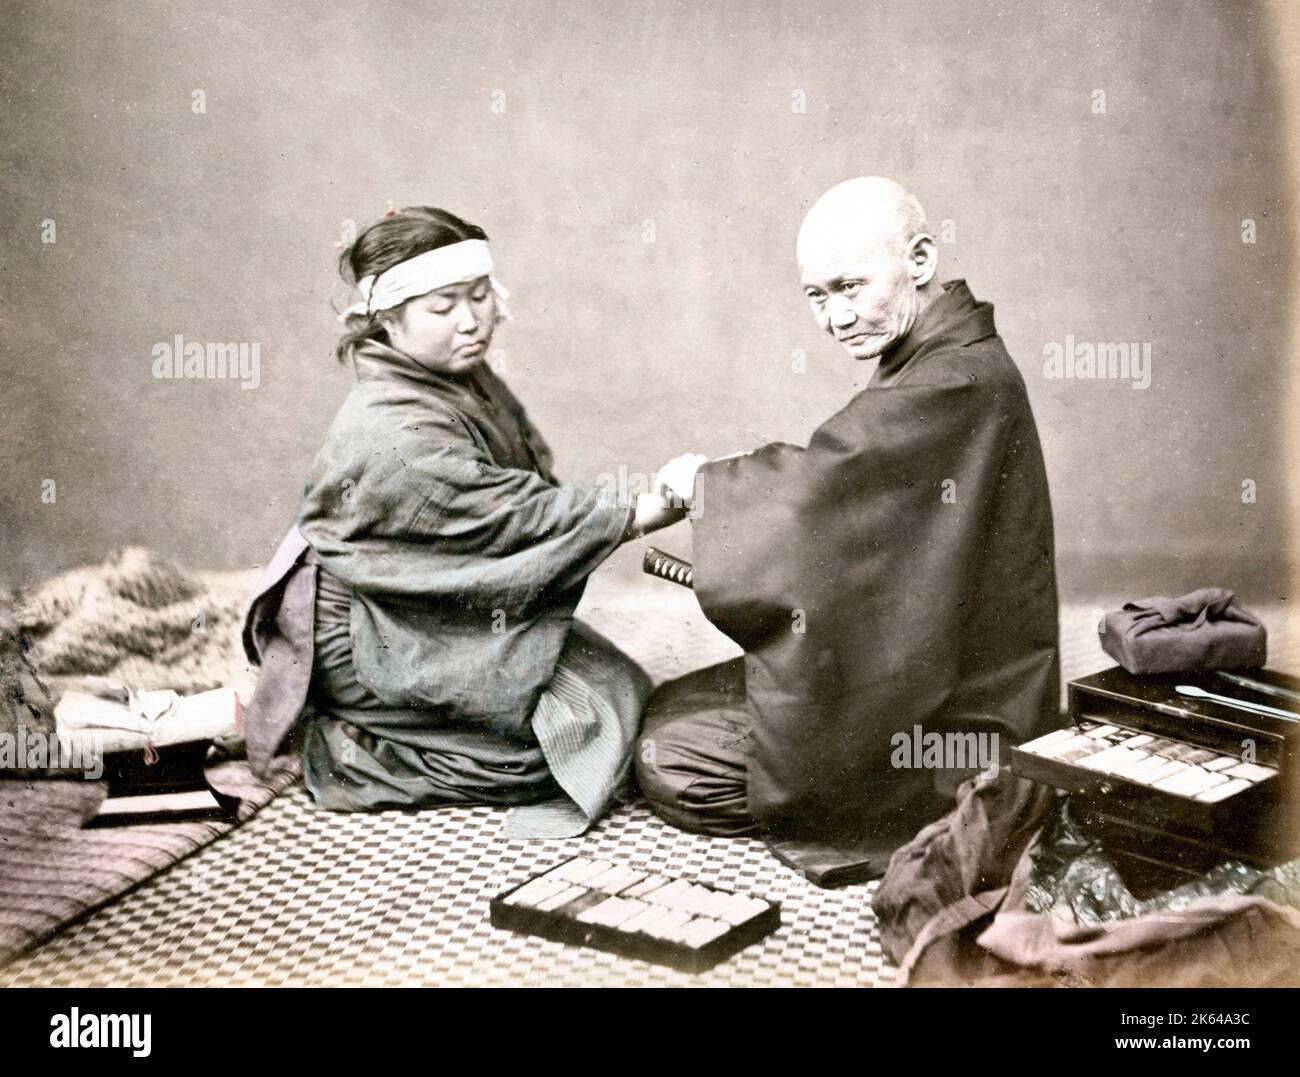 c. 1880s Japan - doctor and patient Stock Photo